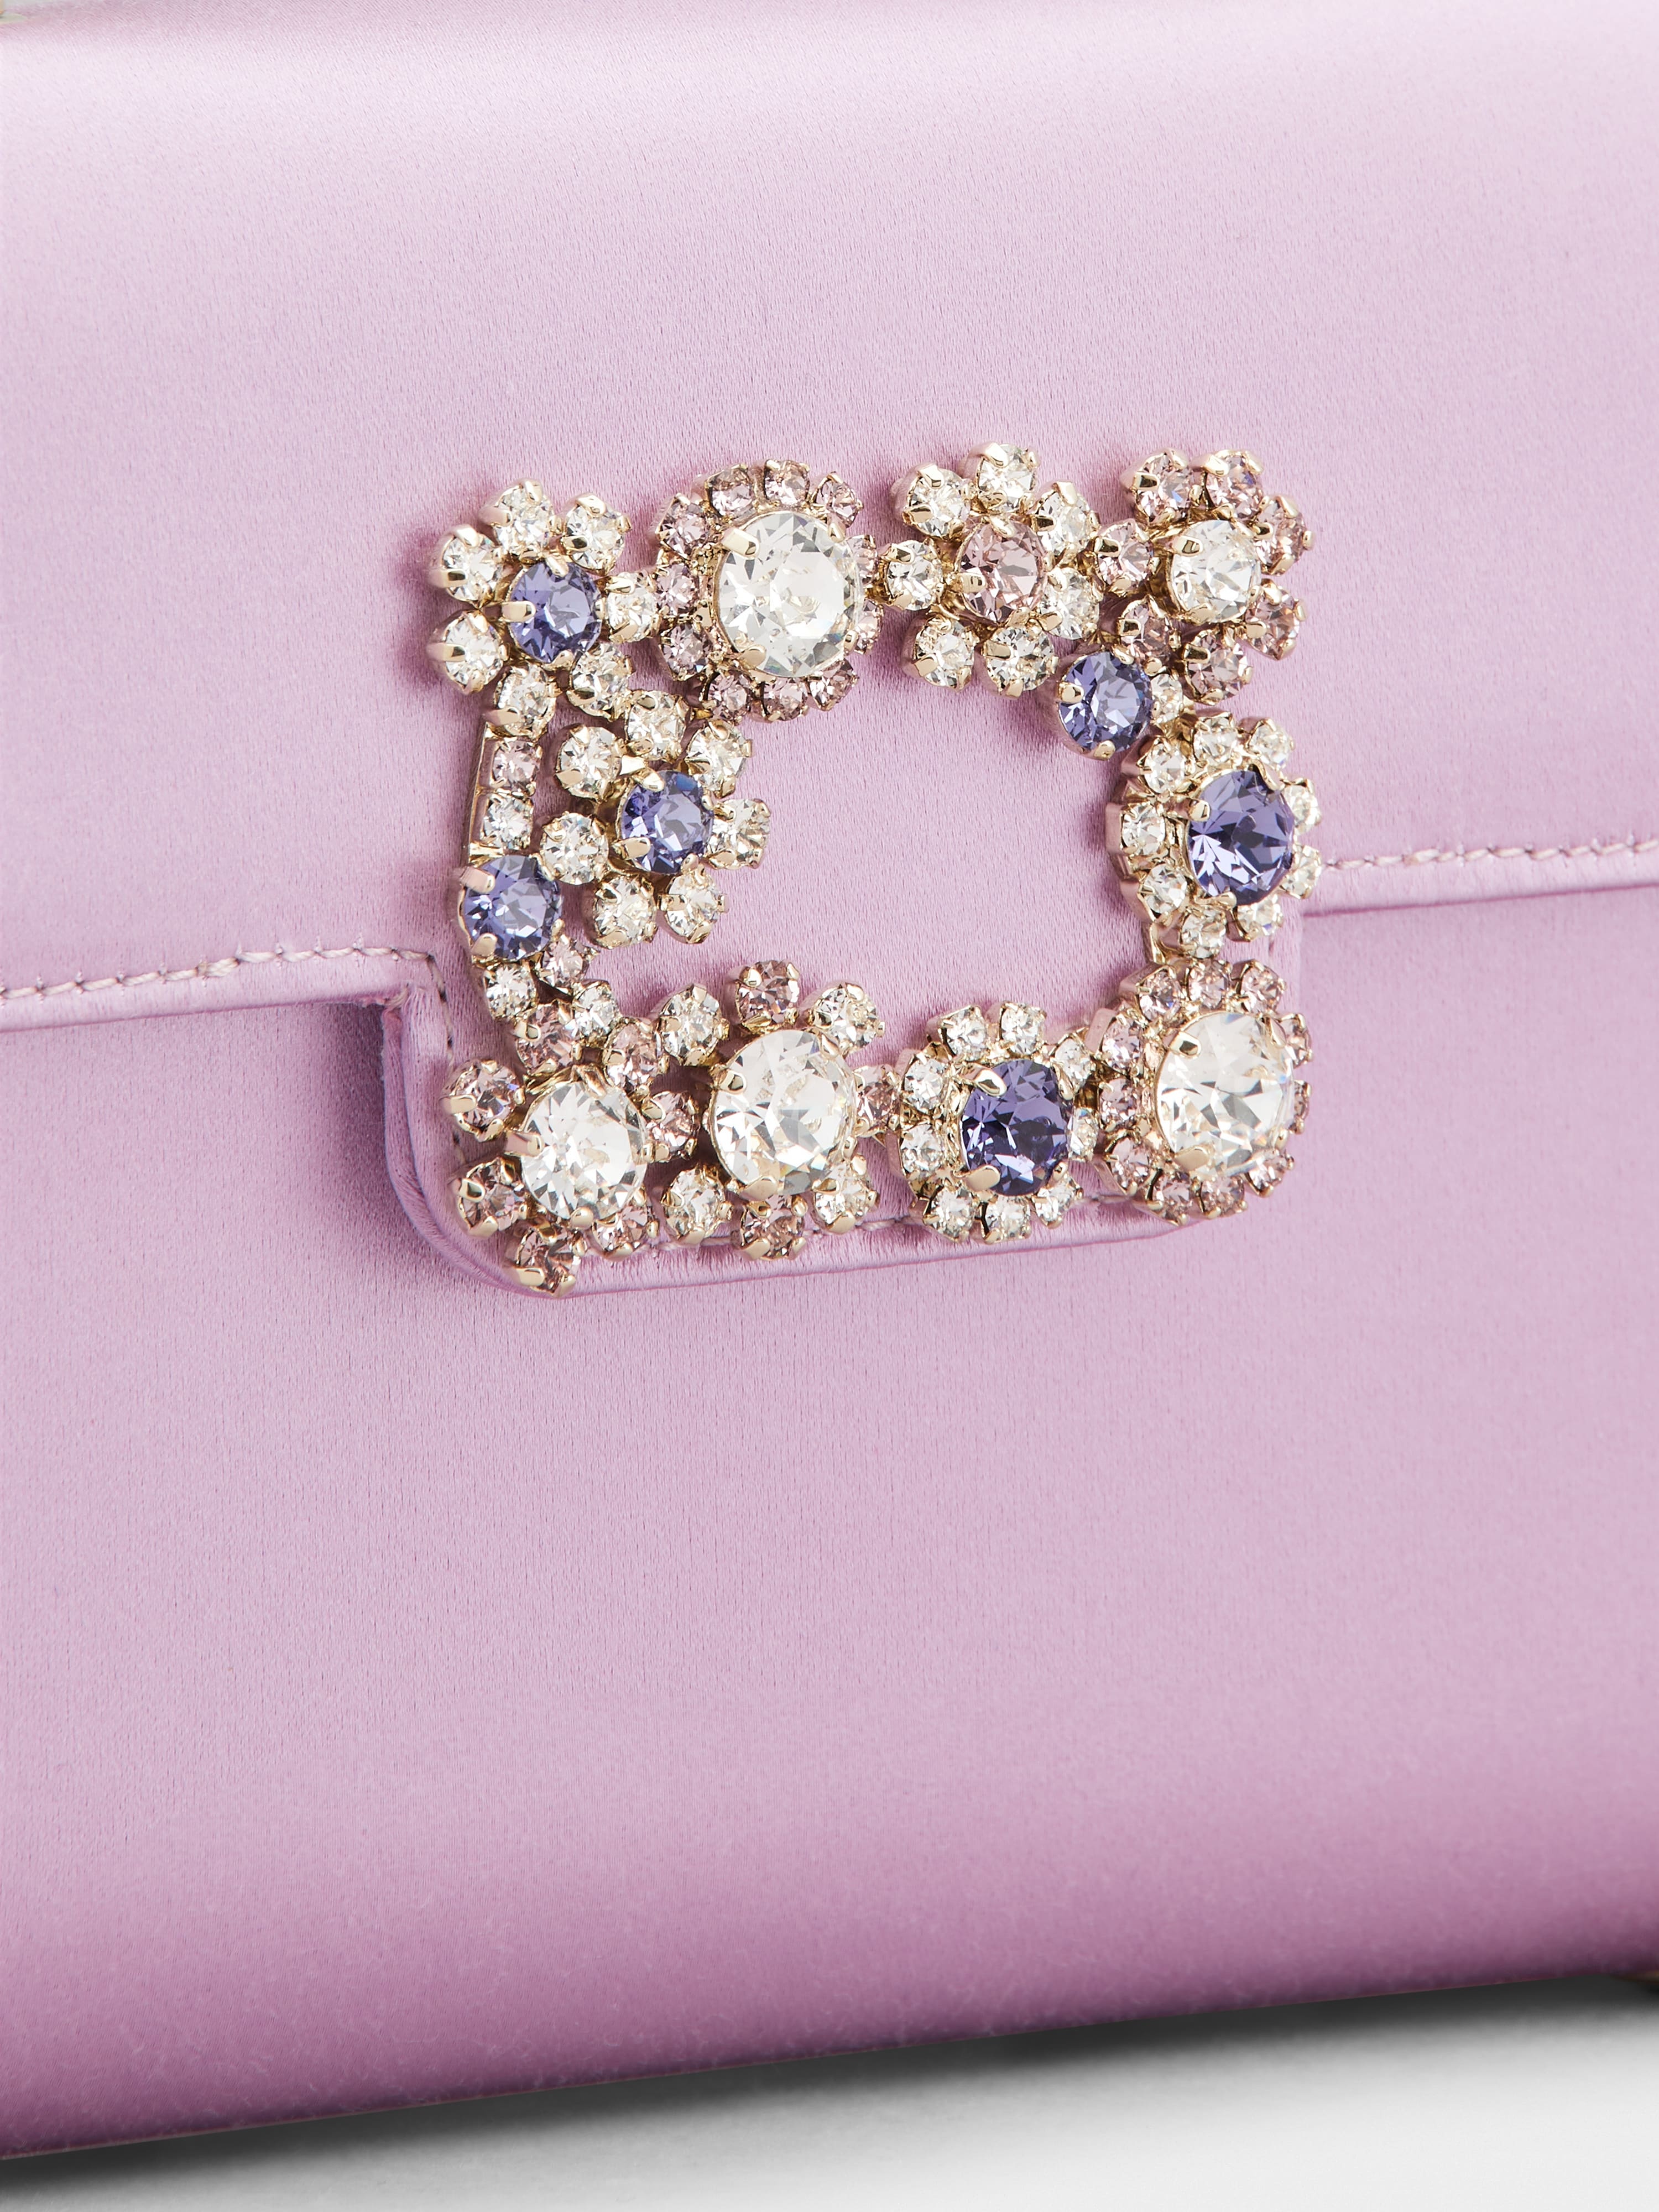 Jewel Mini Flower Strass Colored Buckle Clutch Bag in Satin - 6